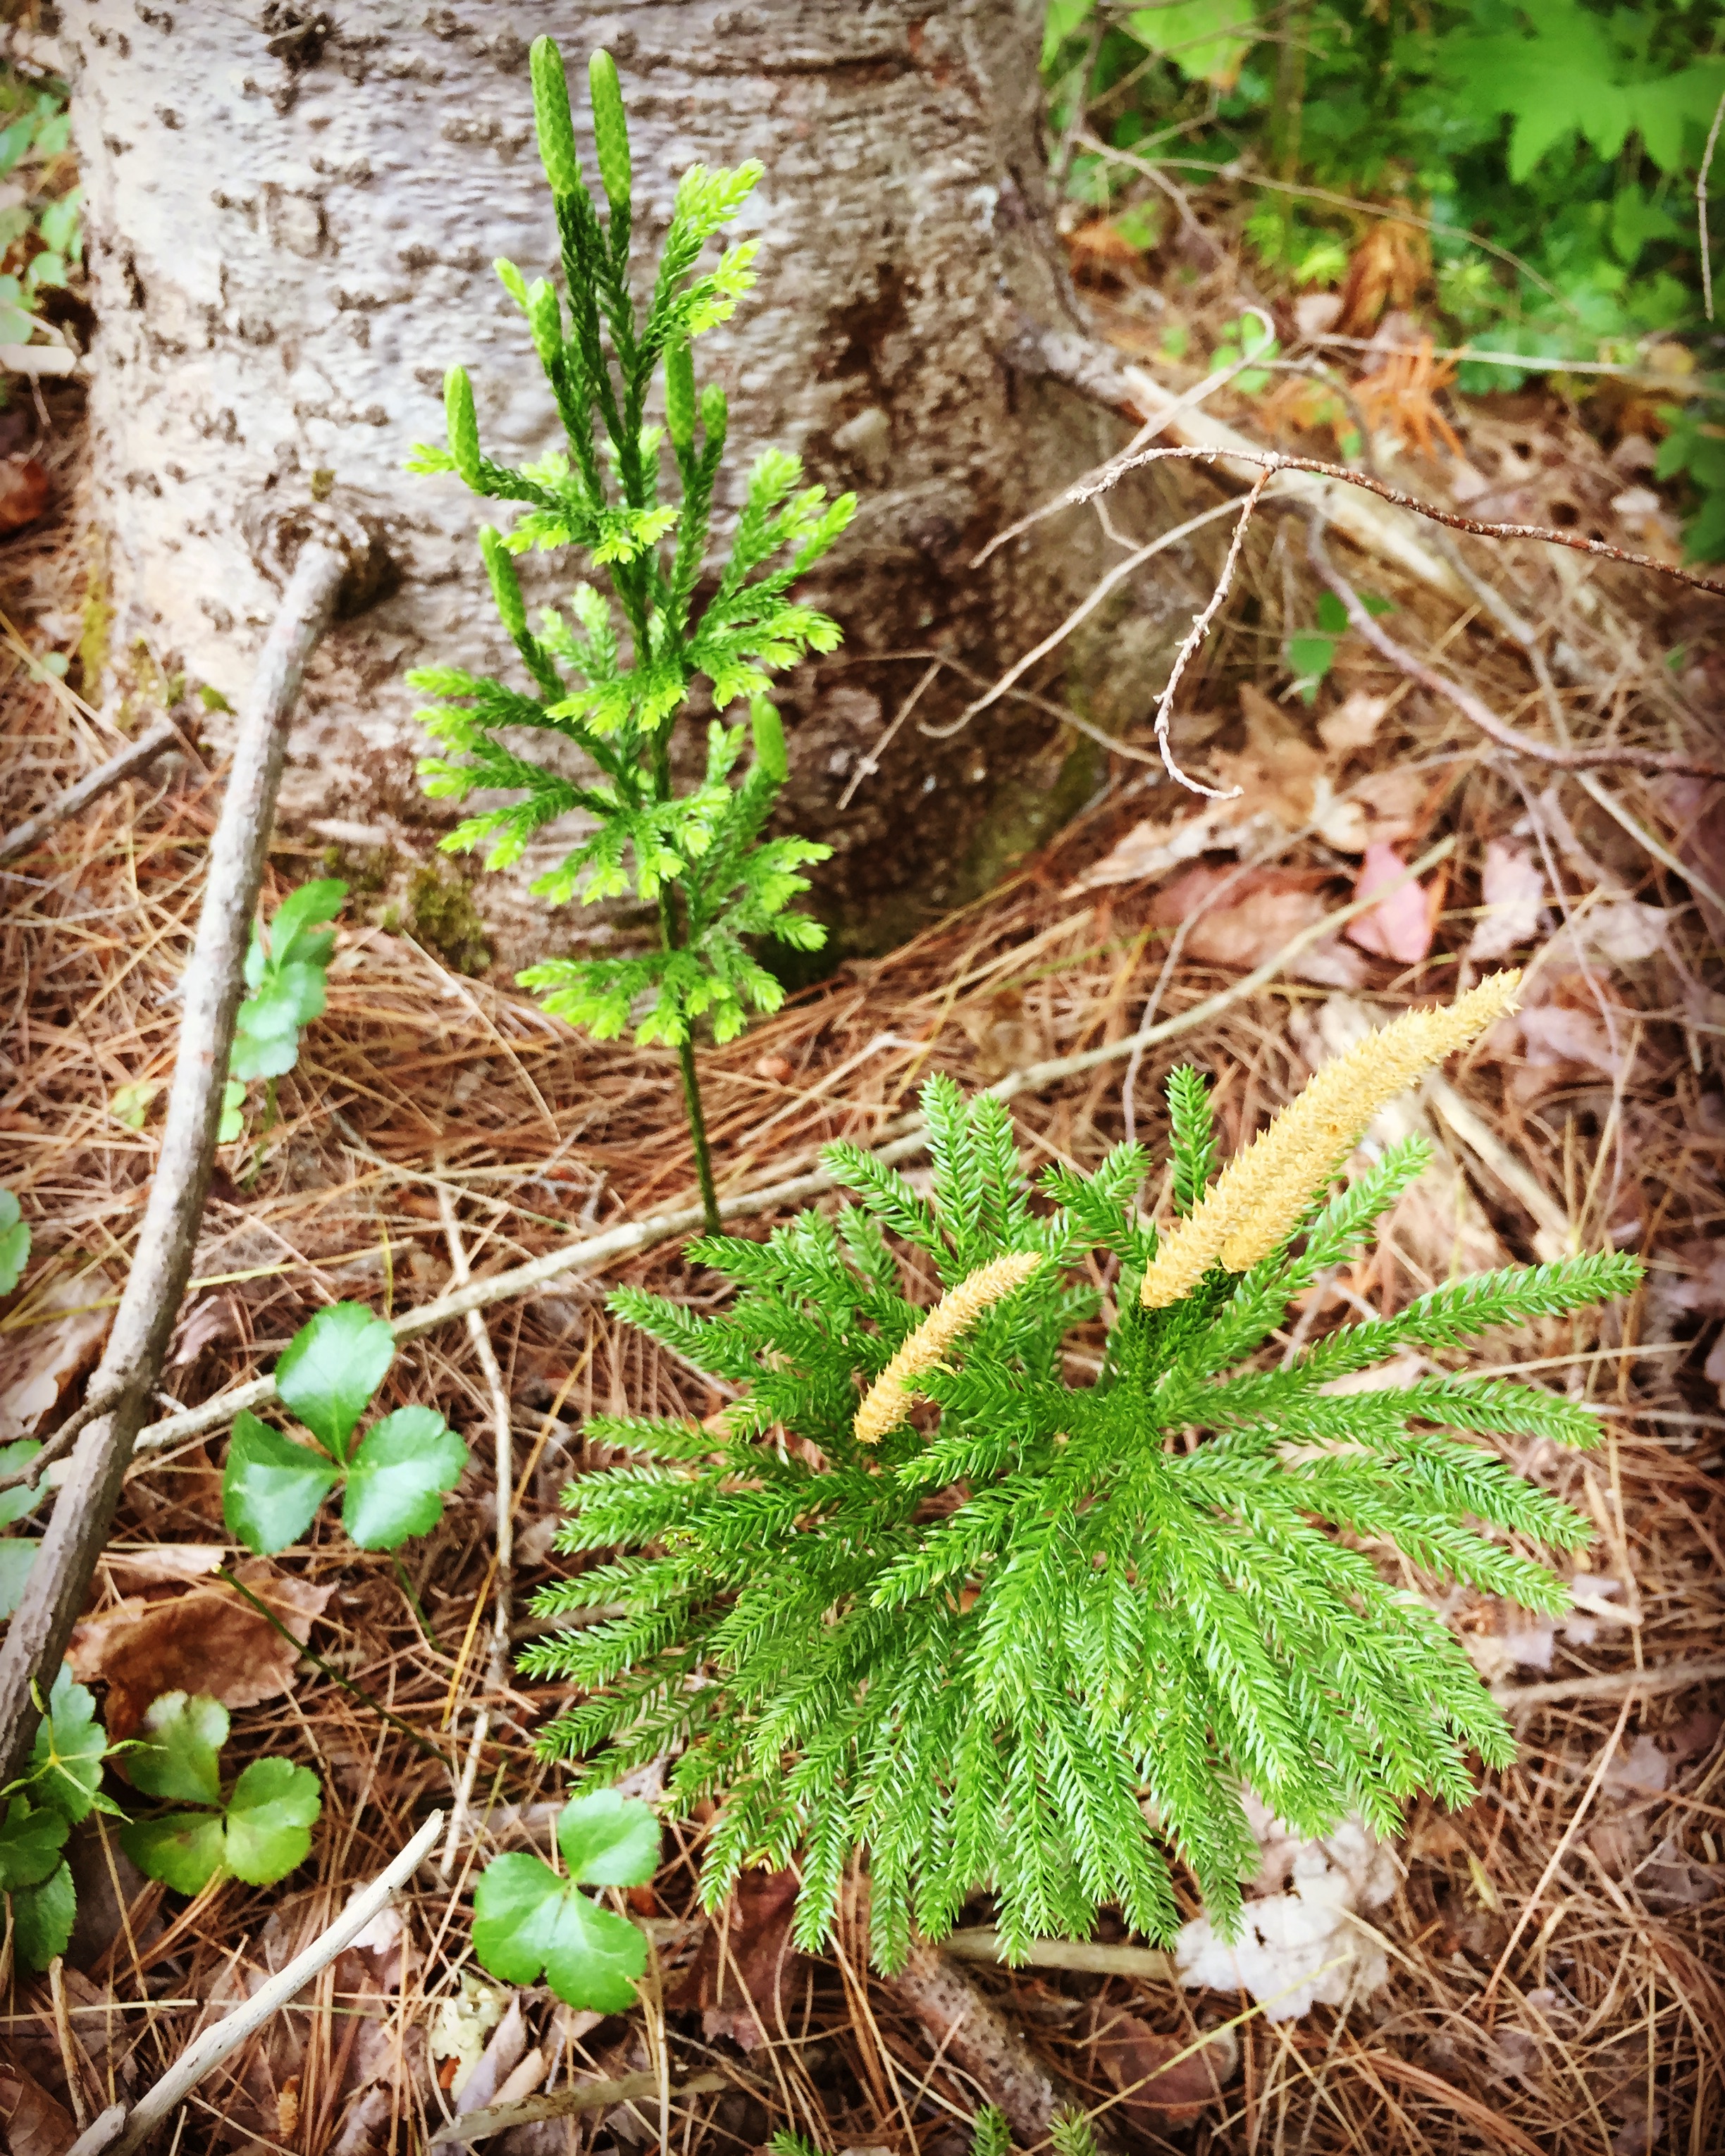  Club moss releasing spores. This is a relative of the earliest plants and is the clan badge for some of my Highland ancestors. It’s best not to disturb these beauties, as they can take 15 years to reproduce. 